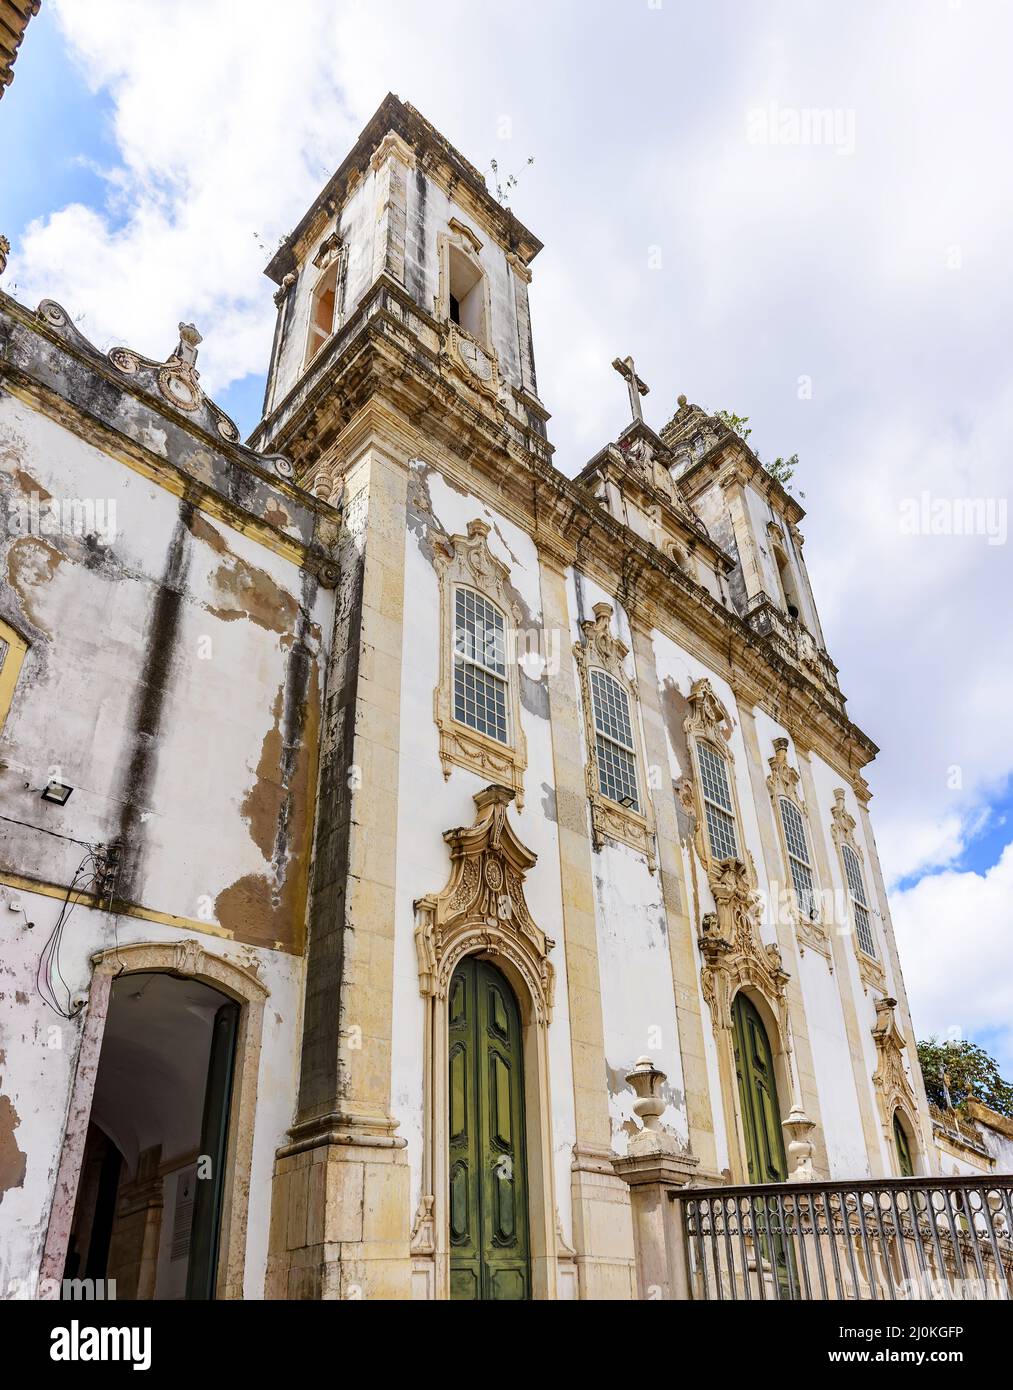 Old and historic church facade located in Salvador, Bahia Stock Photo